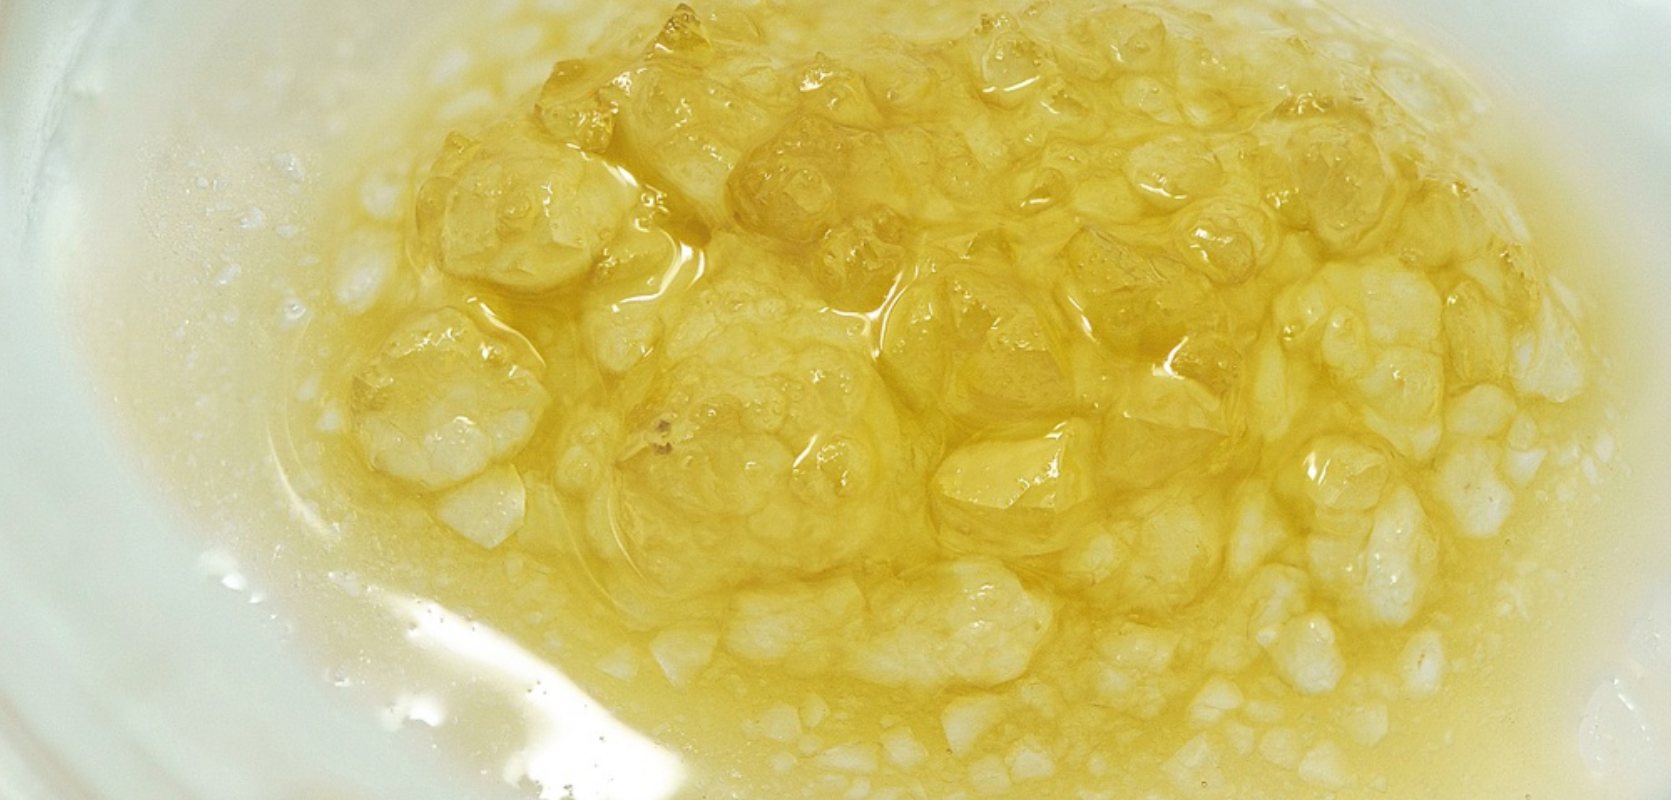 While a diamond concentrate can be created from any cannabinoid, the most popular are CBD and THC. 